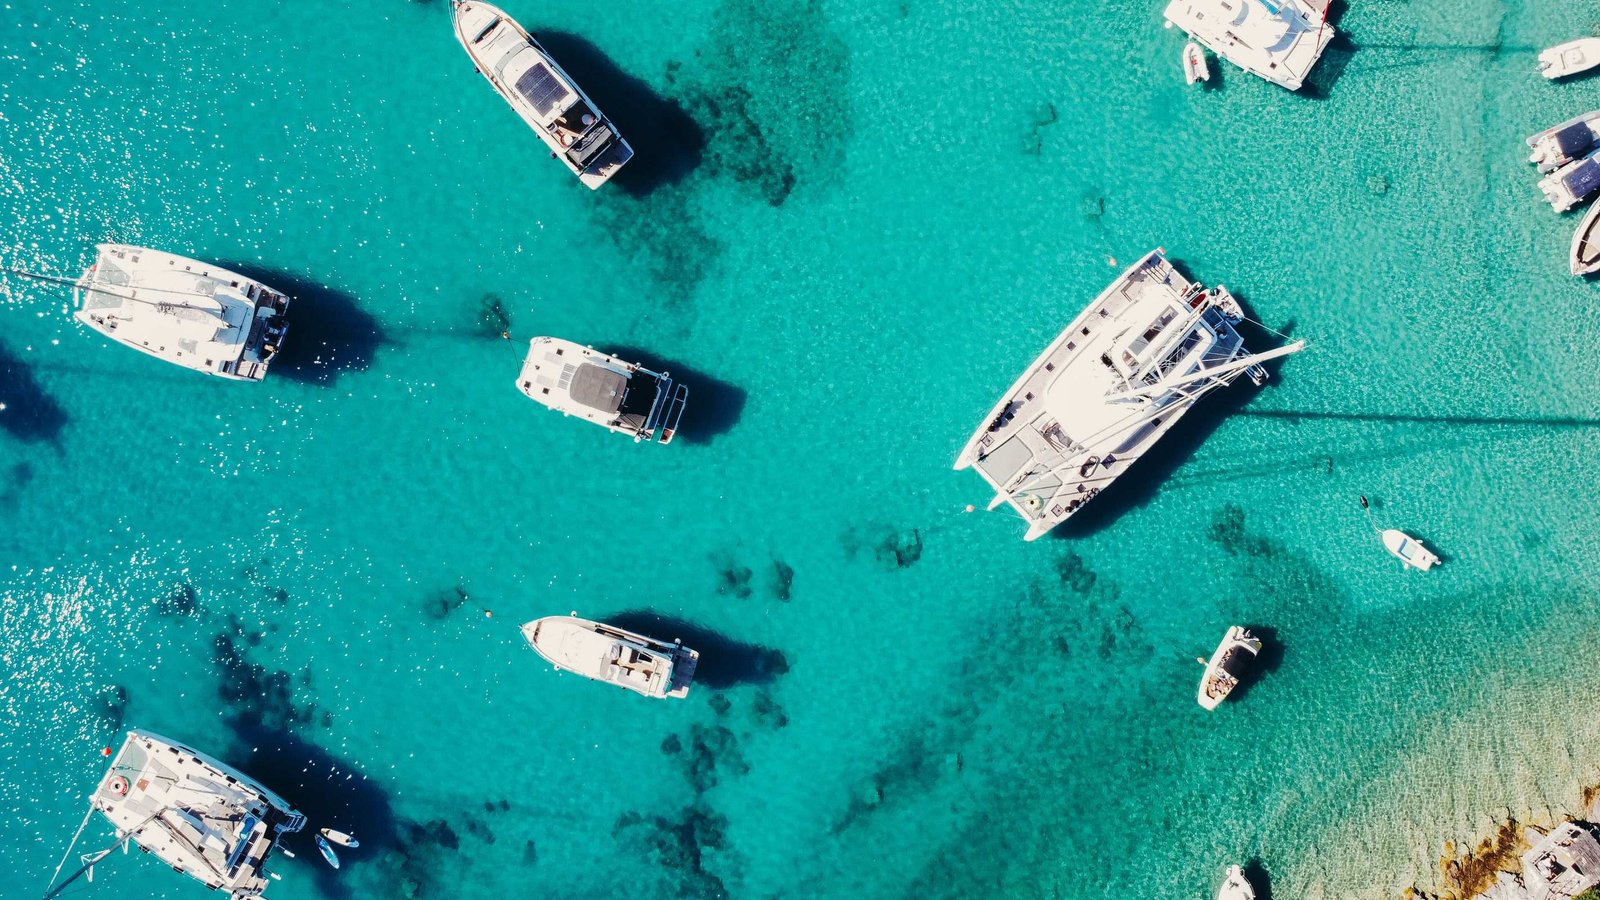 Top down view of turquoise water with many white boats in the water